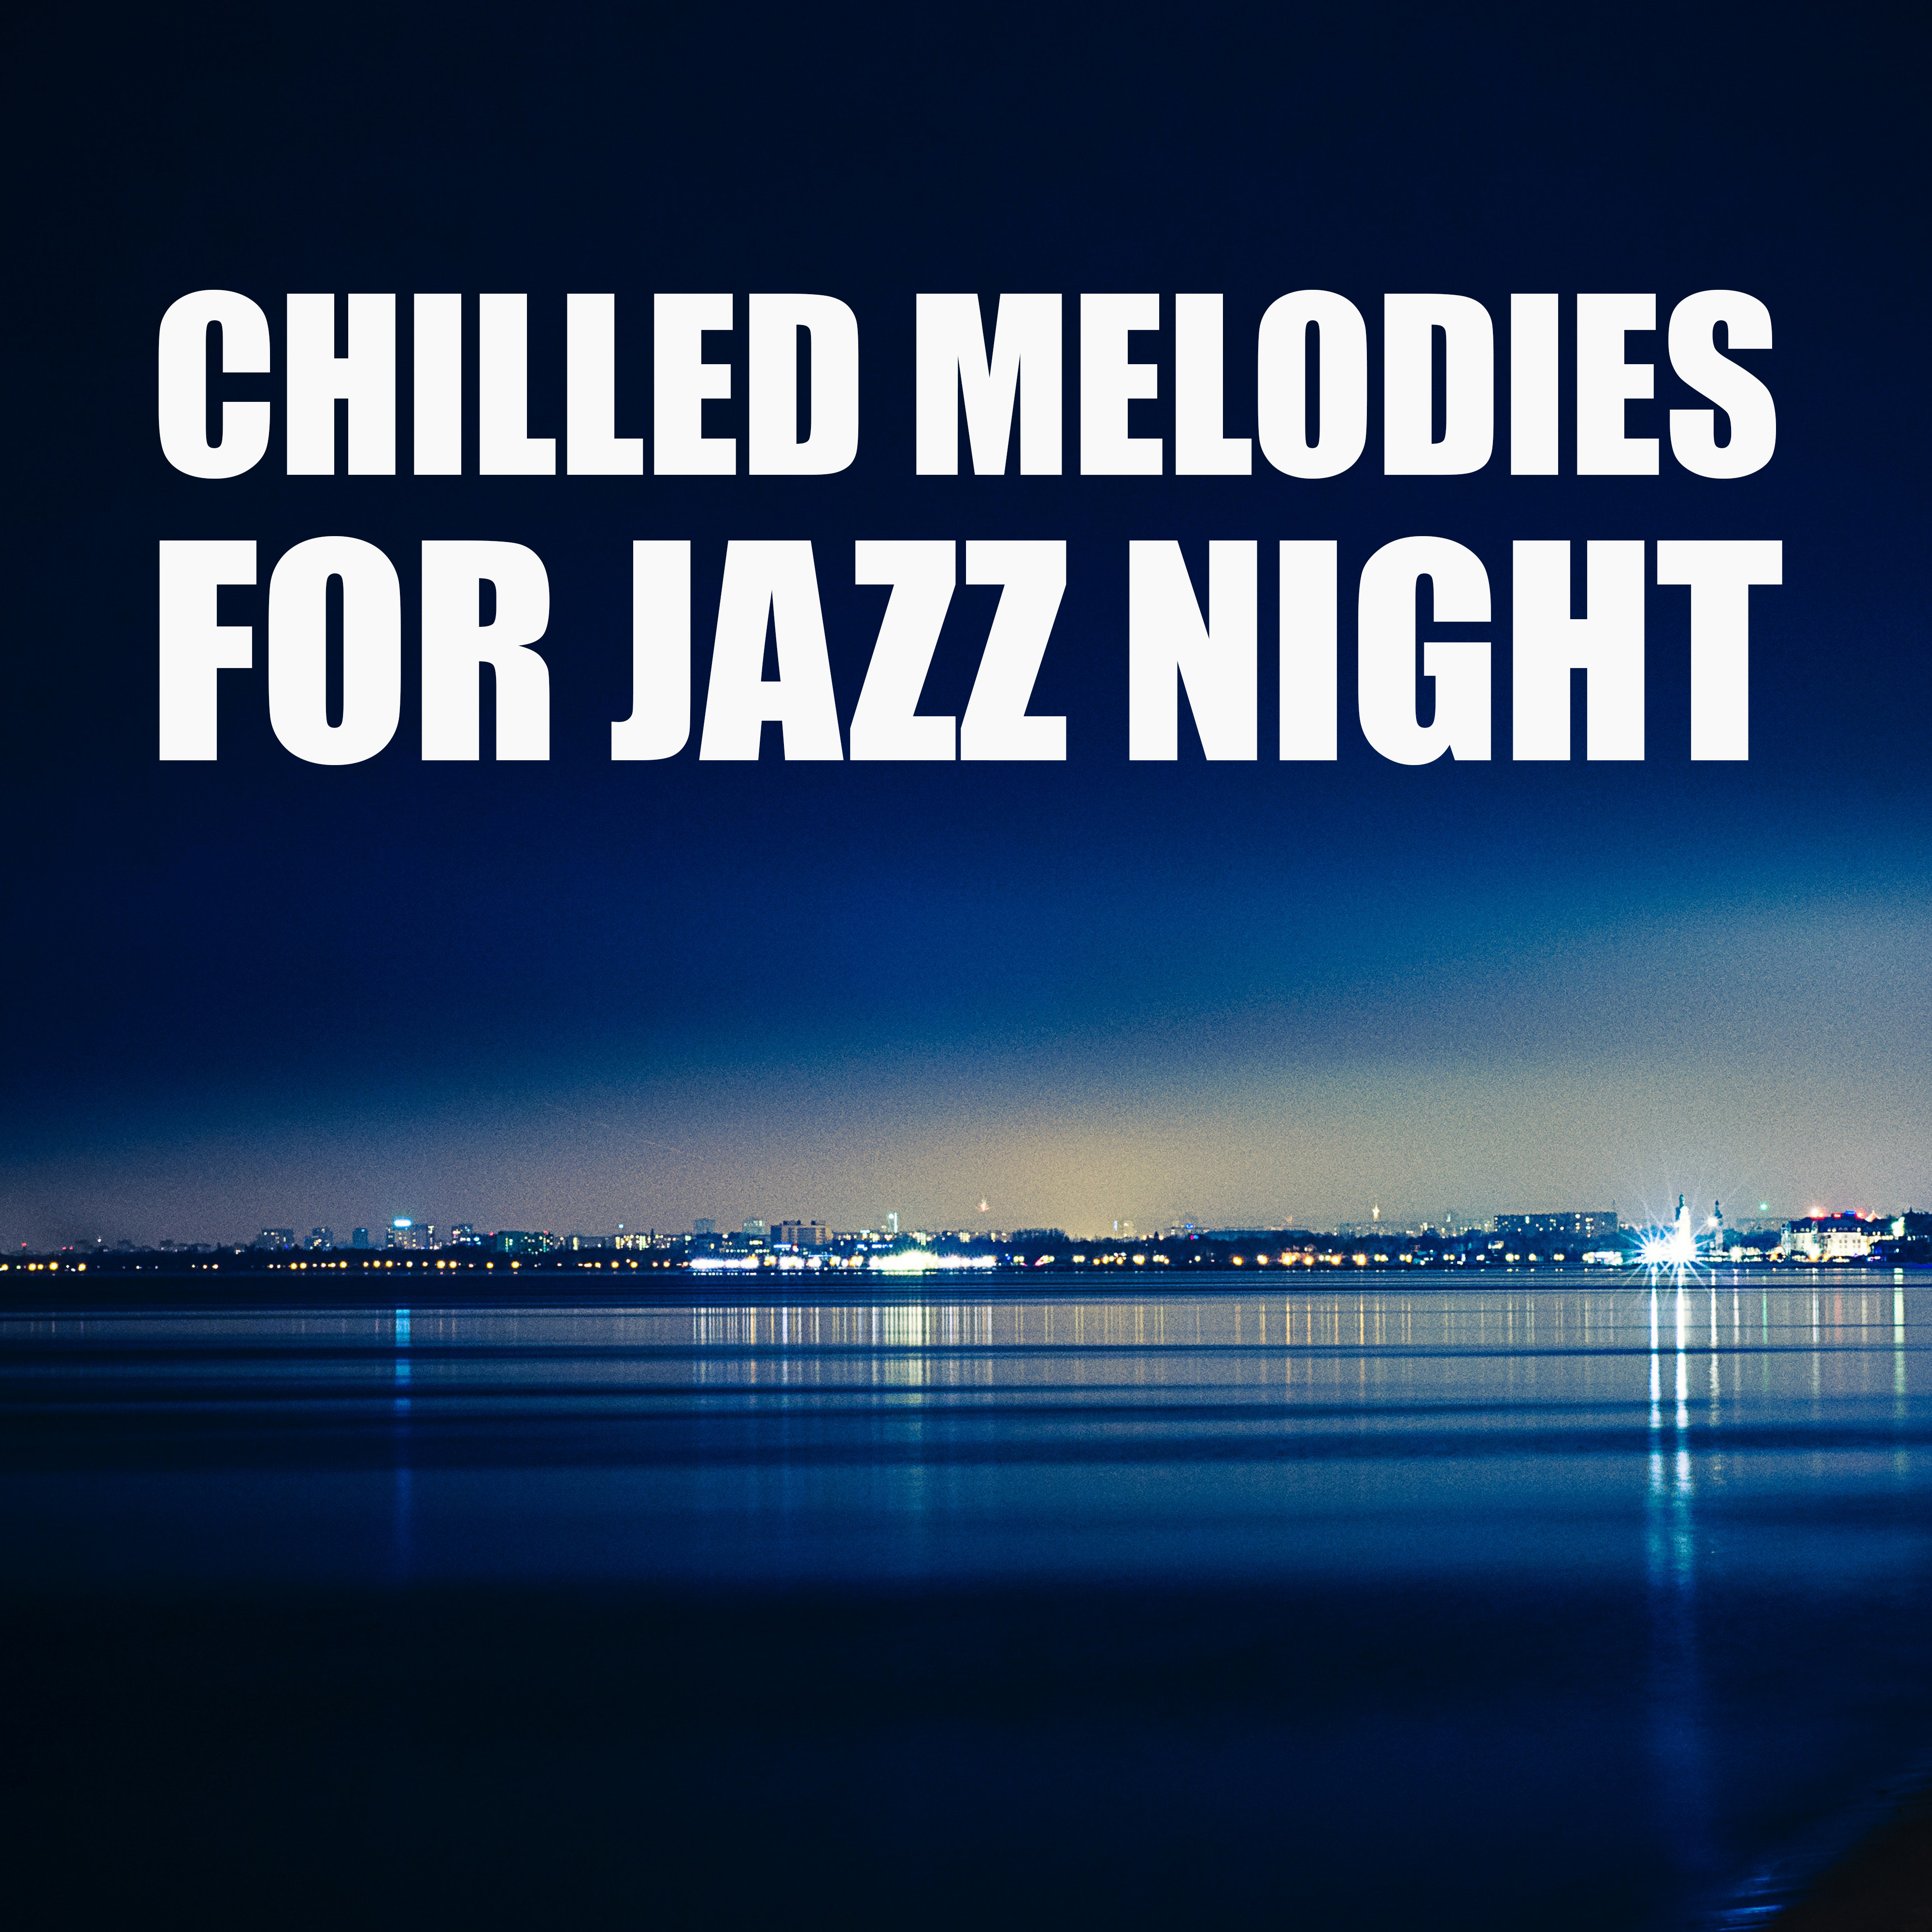 Chilled Melodies for Jazz Night